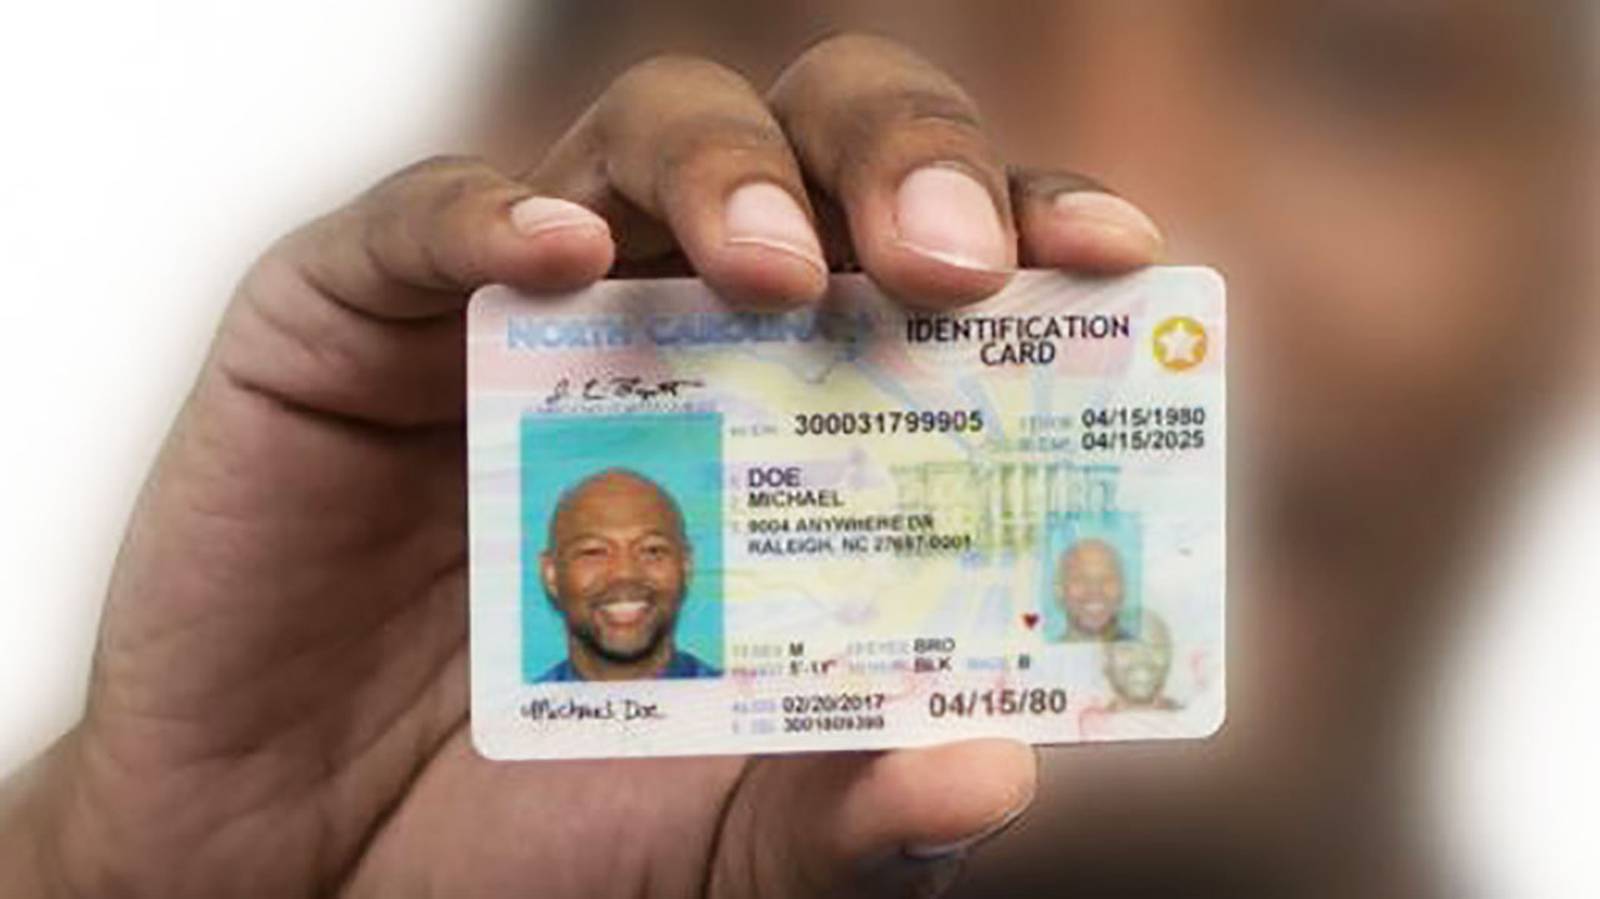 South Carolina DMV chief Don't wait to get Real cards